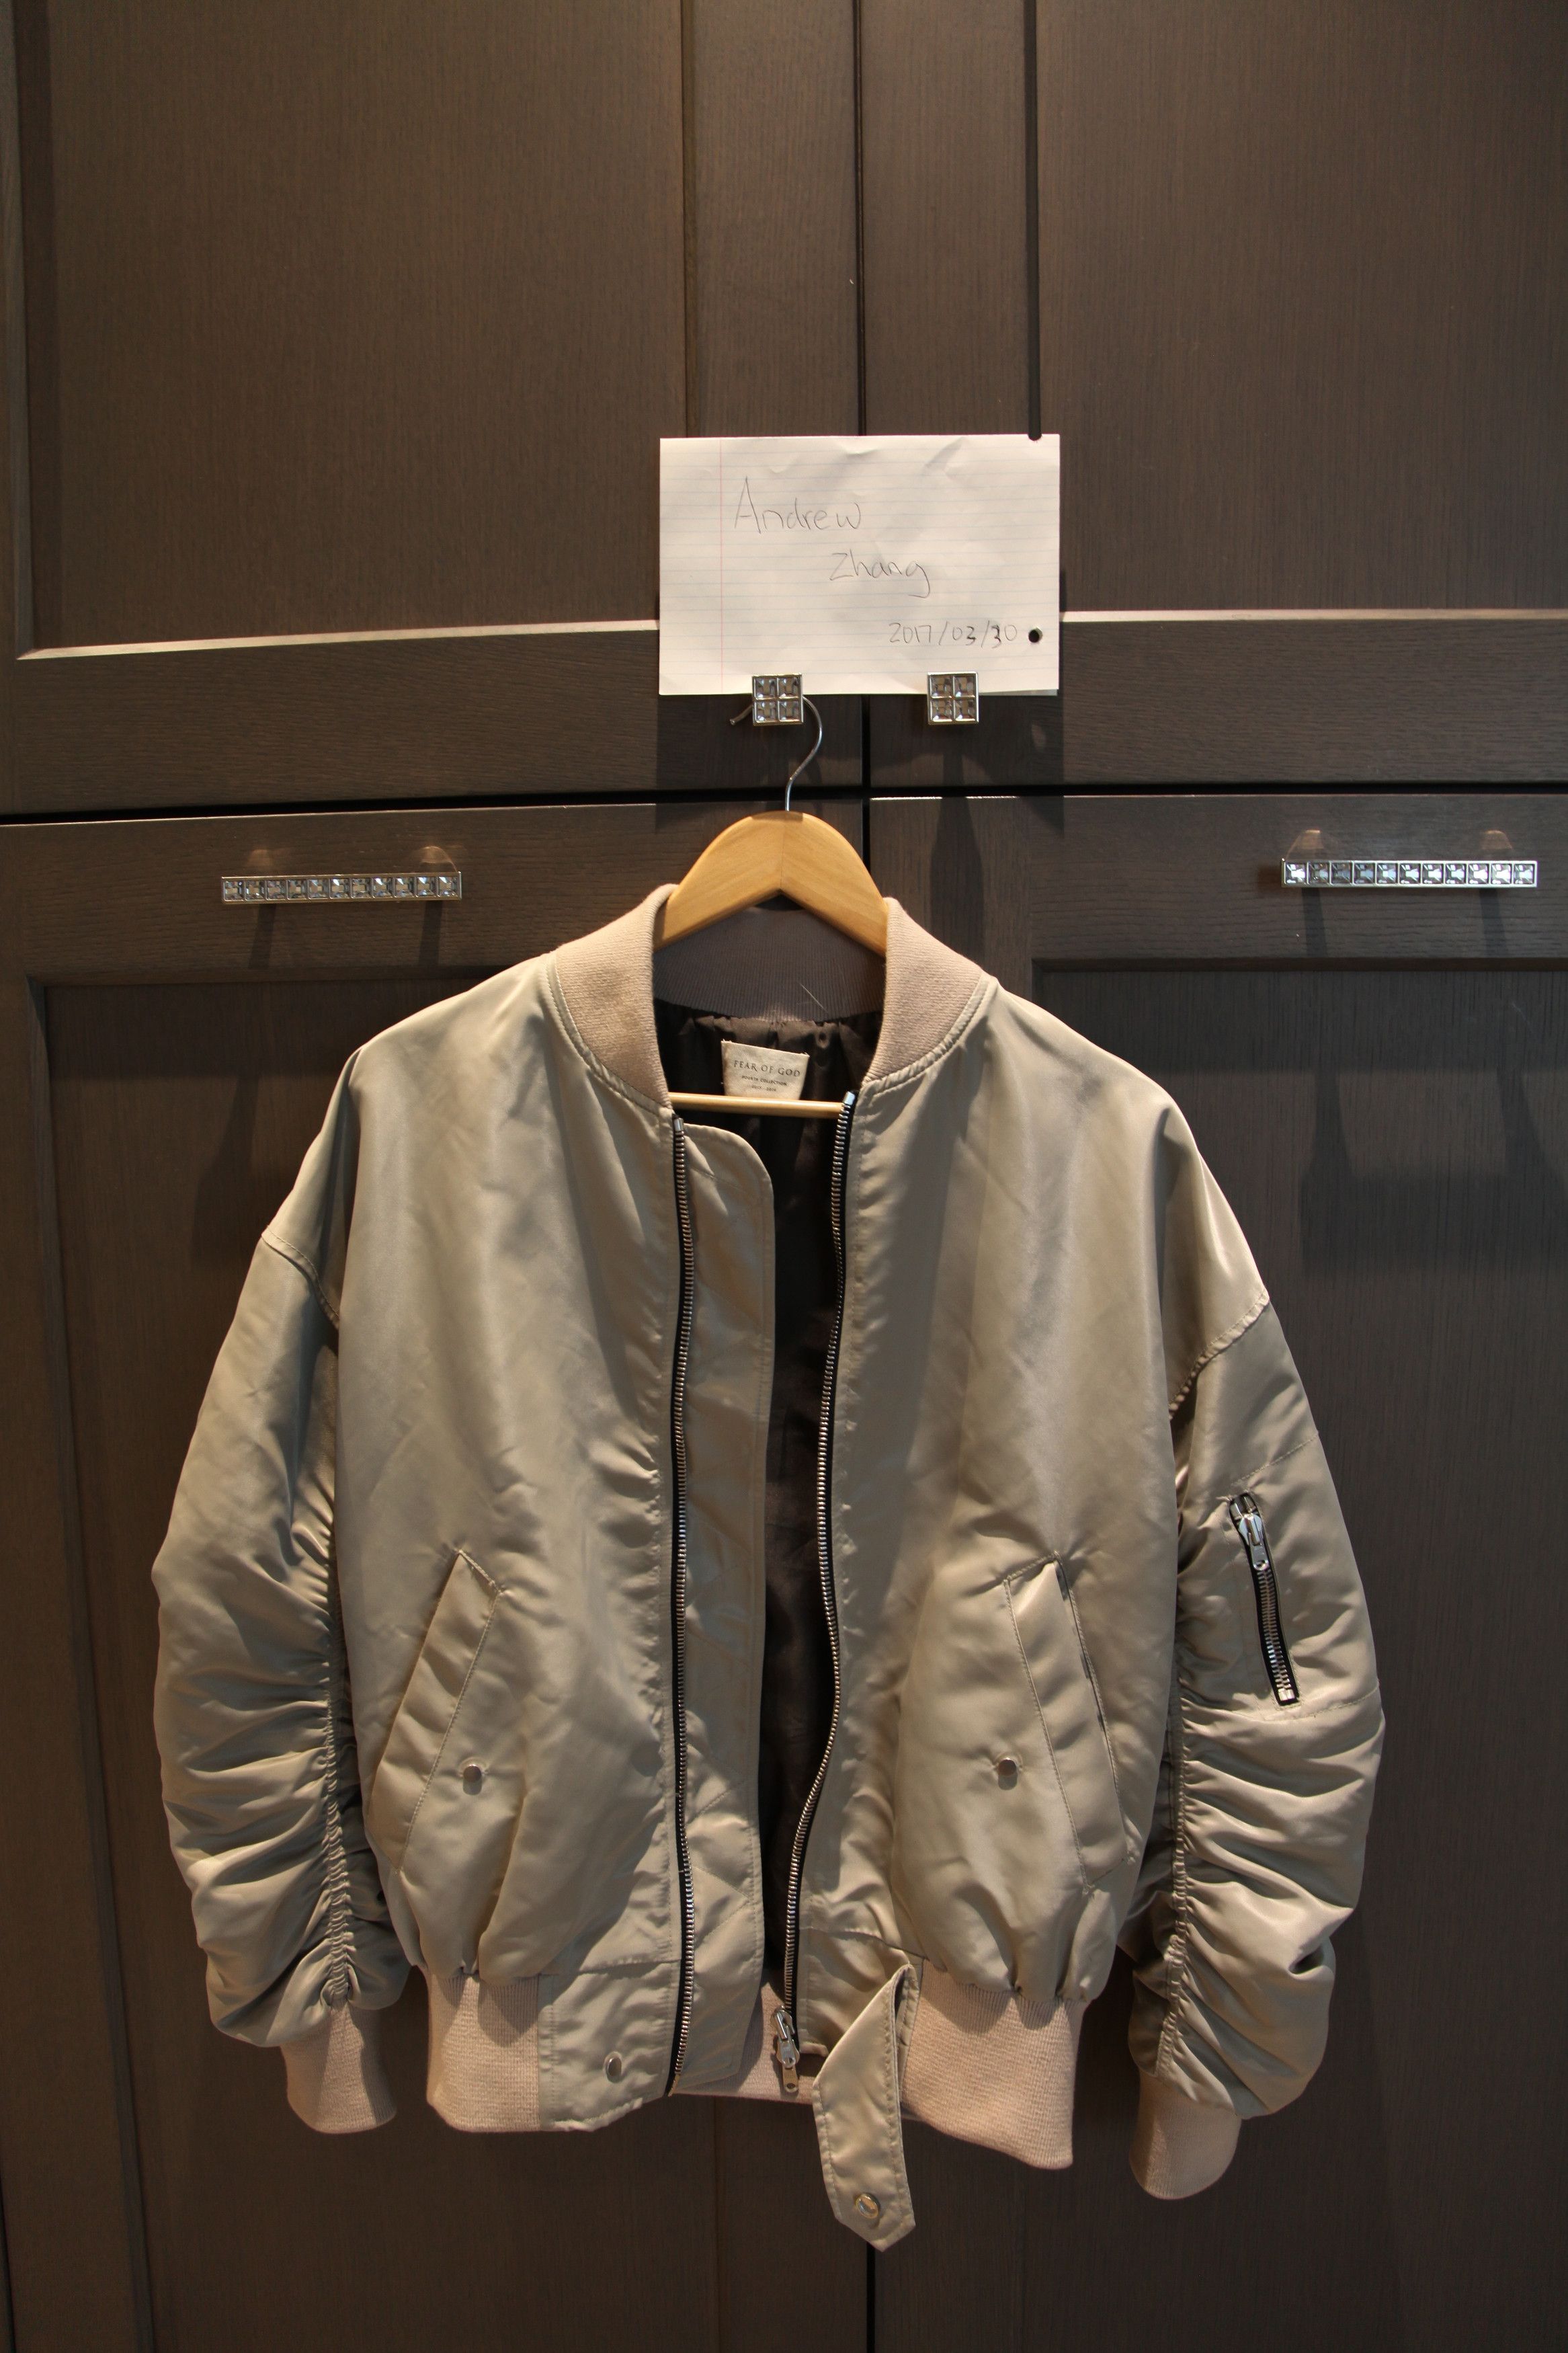 Fear of God 4th Collection Bomber - Silver | Grailed